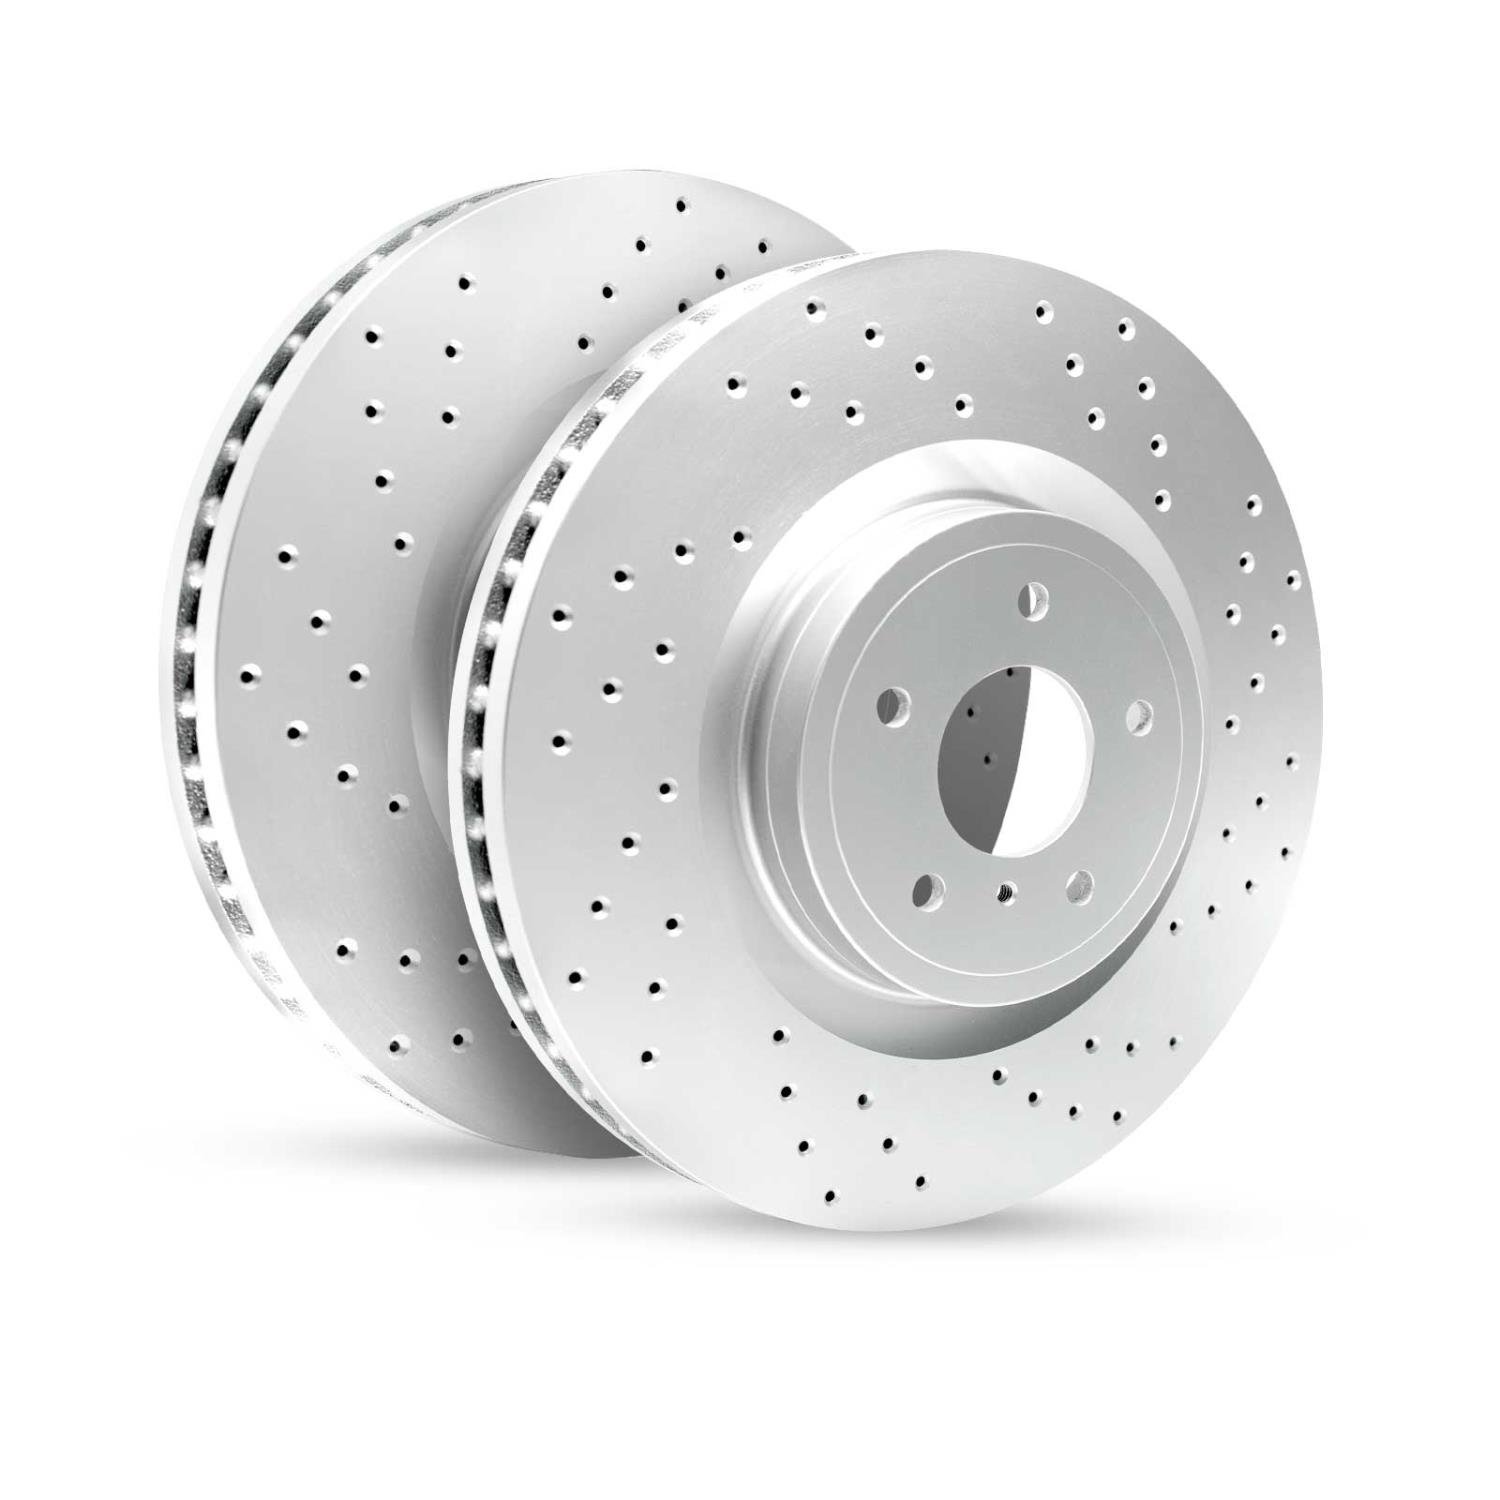 GEO-Carbon Drilled/Slotted Rotors, 1997-2005 Acura/Honda,